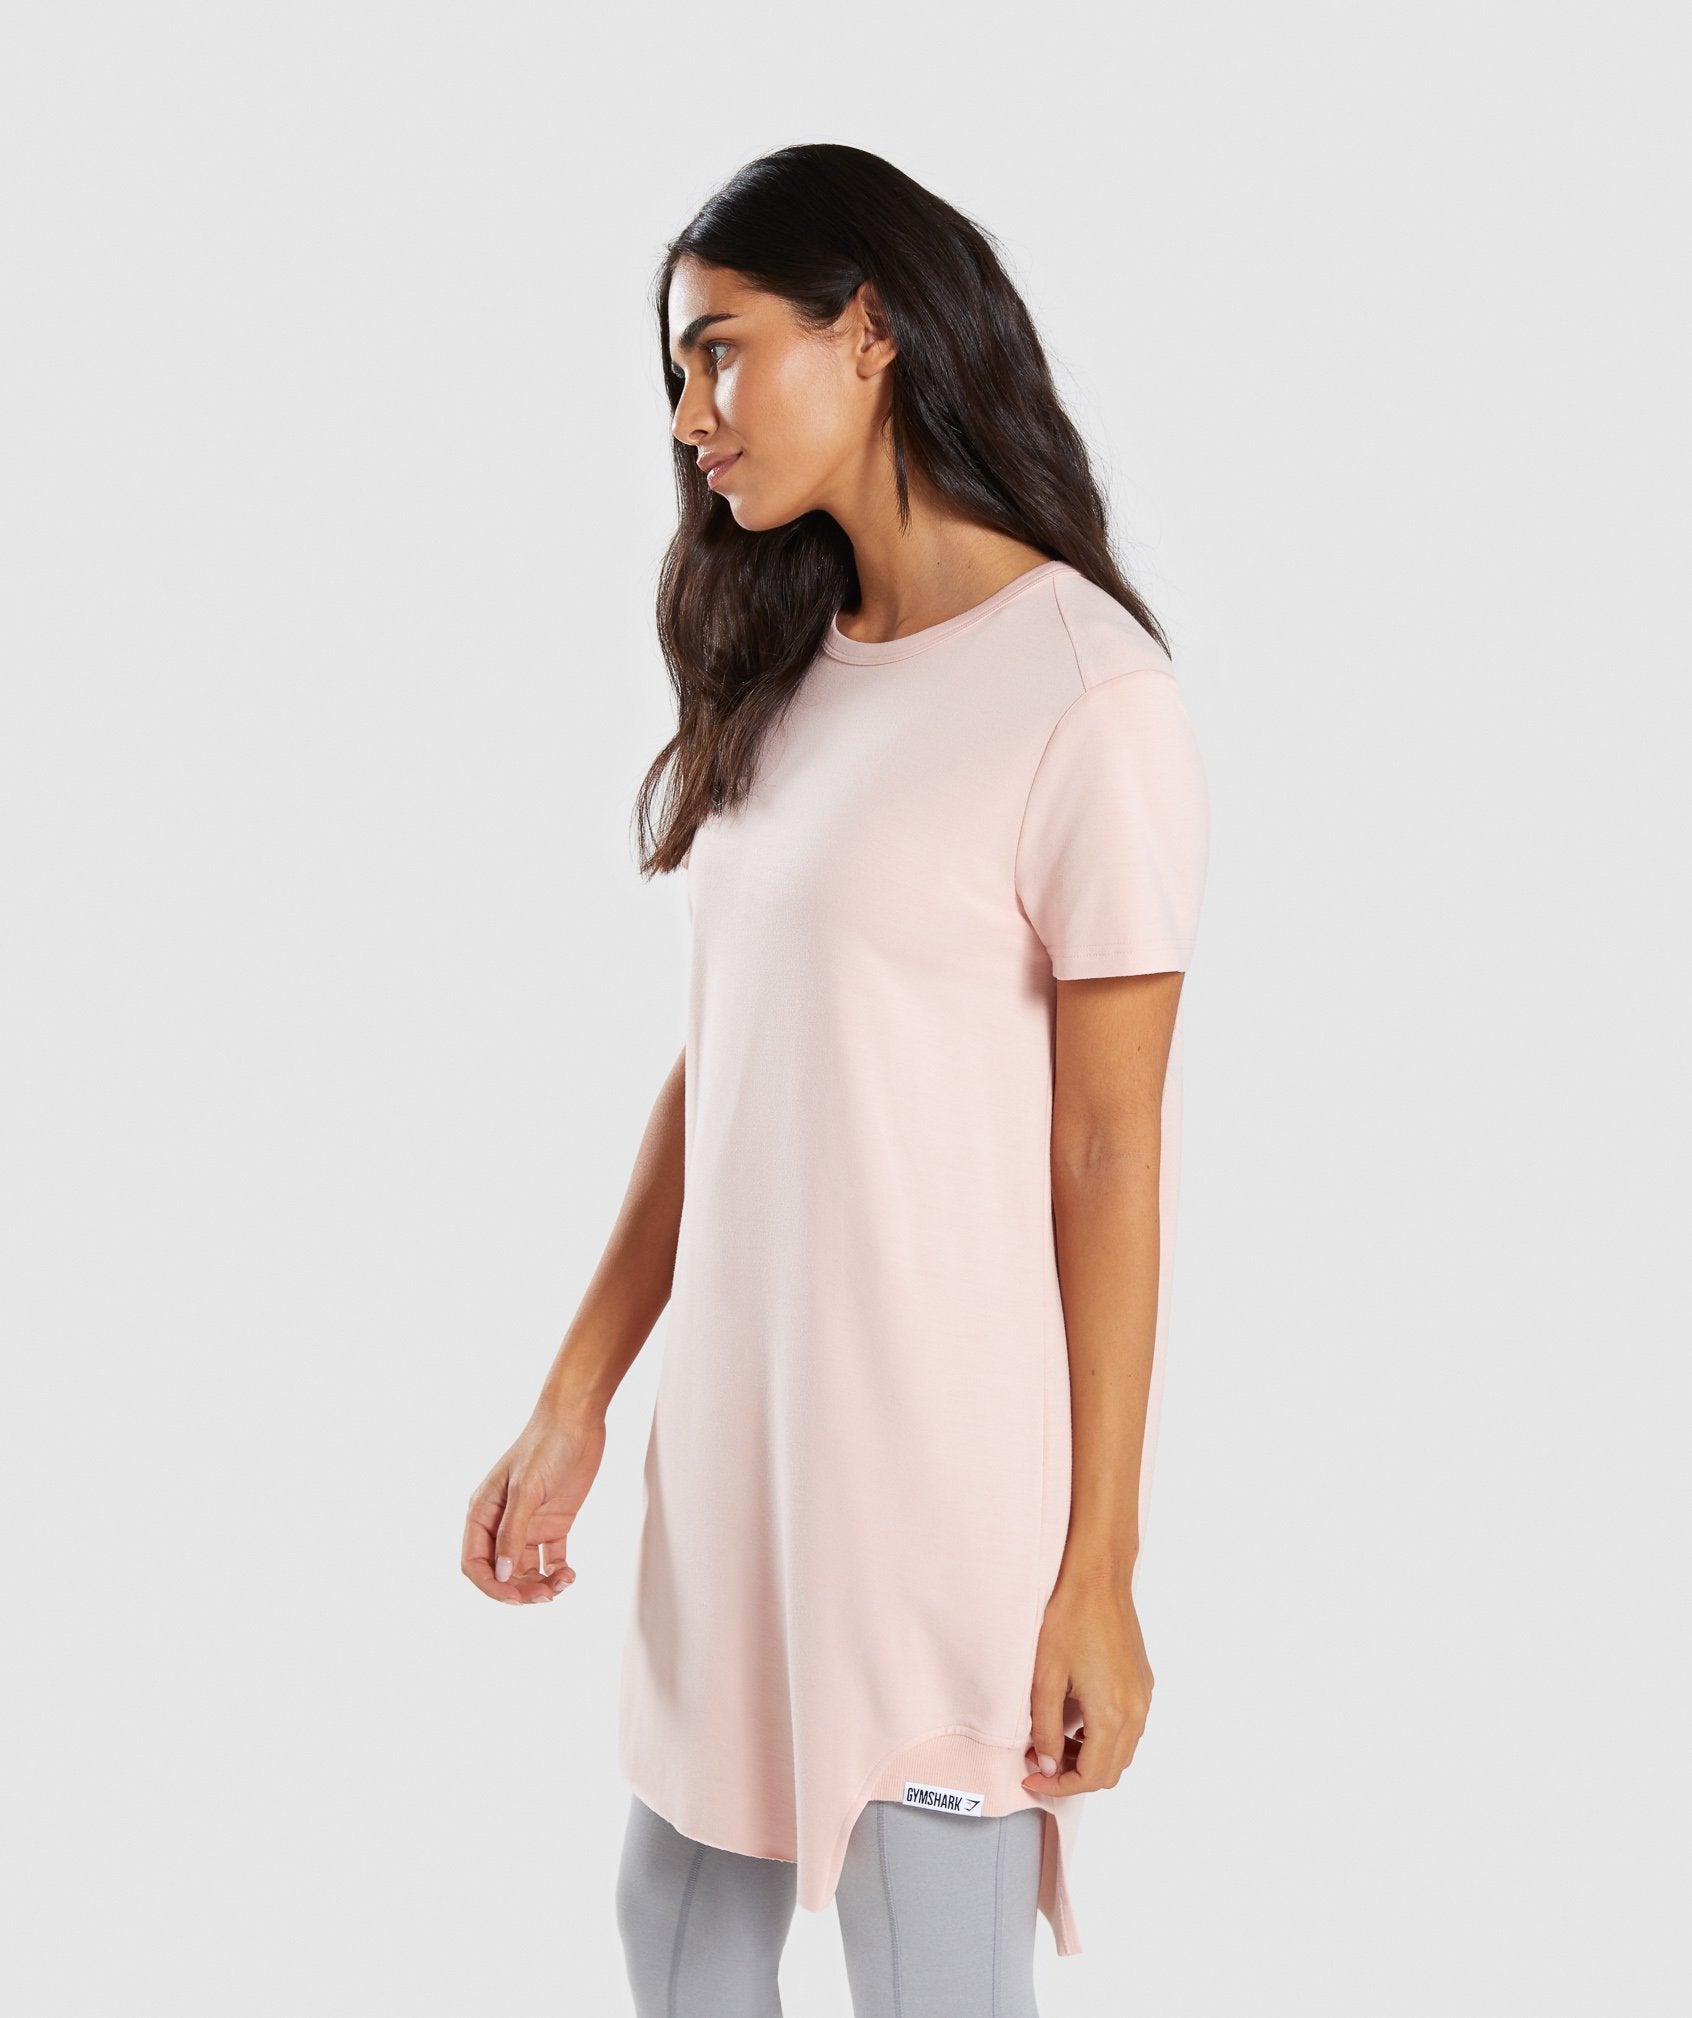 Slounge Crescent T-Shirt Dress in Blush Nude - view 3